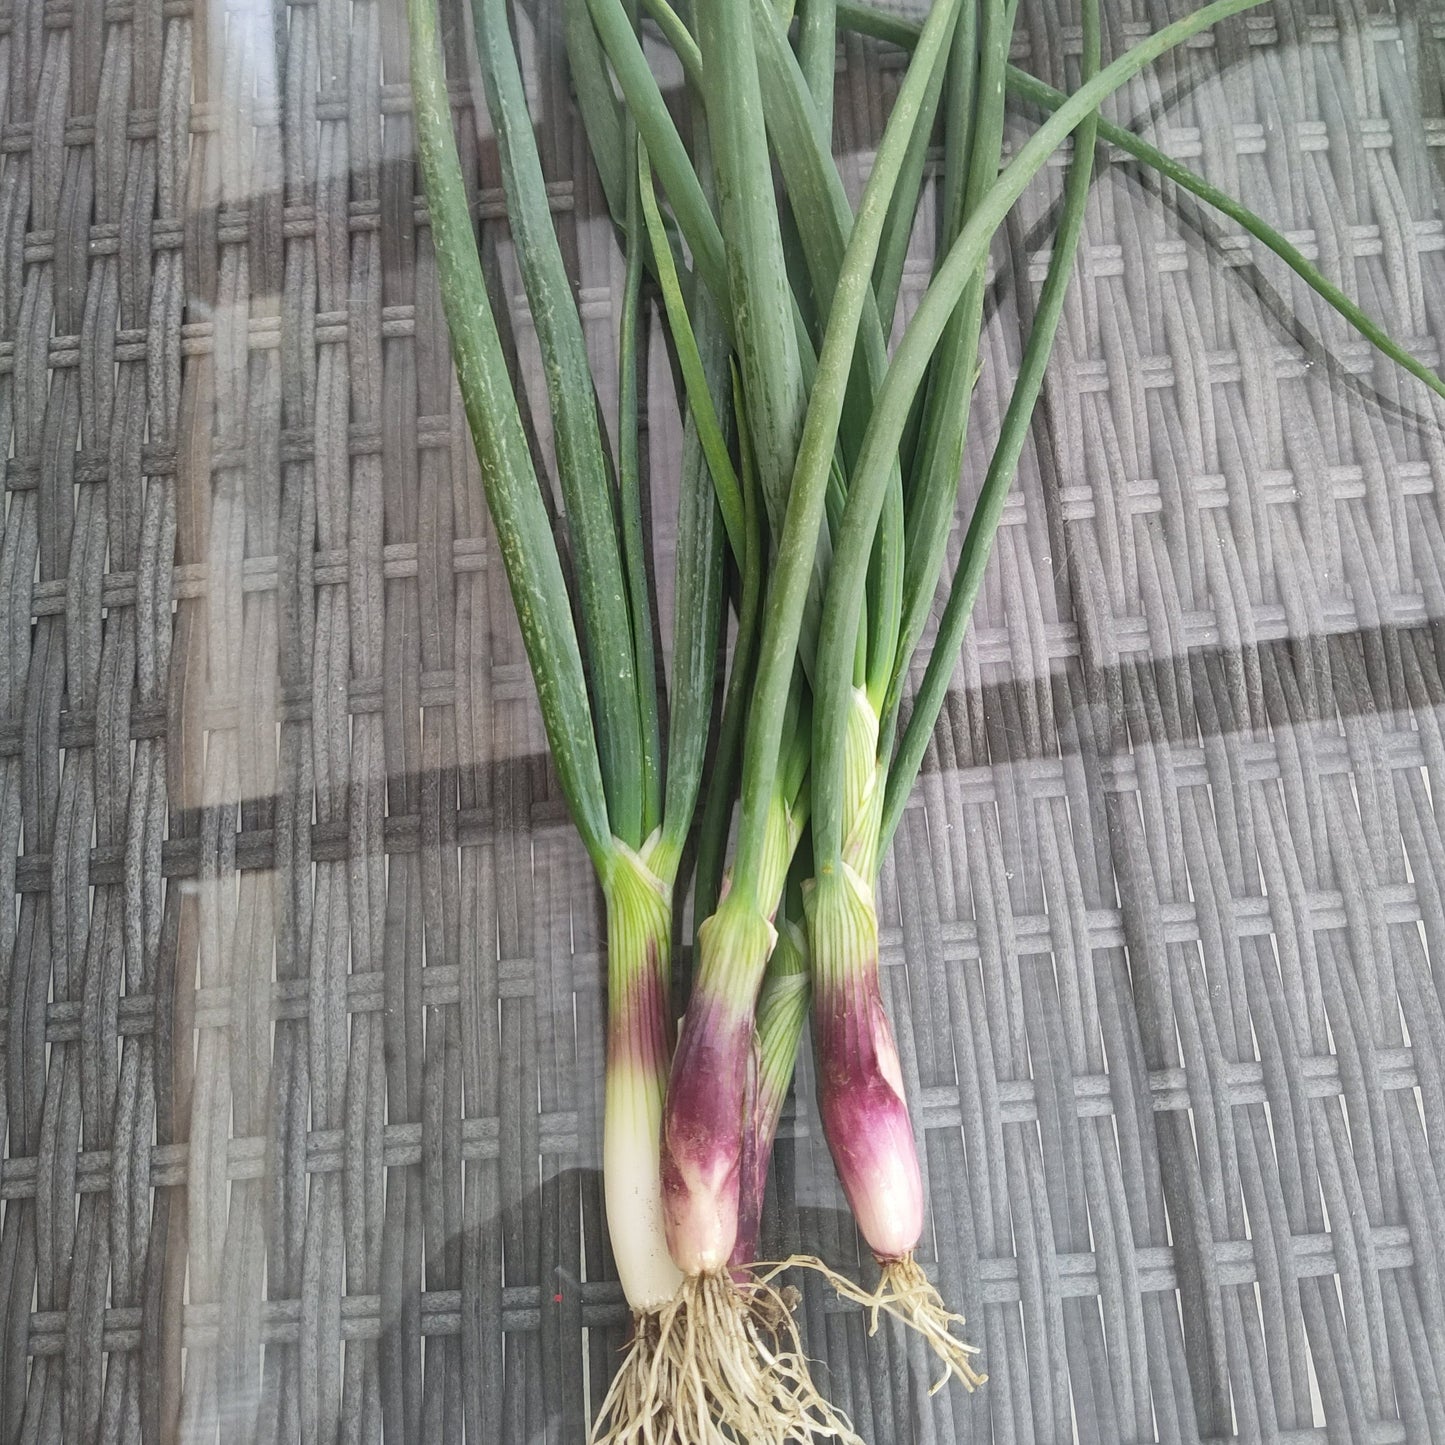 Red Long of Tropea Onions